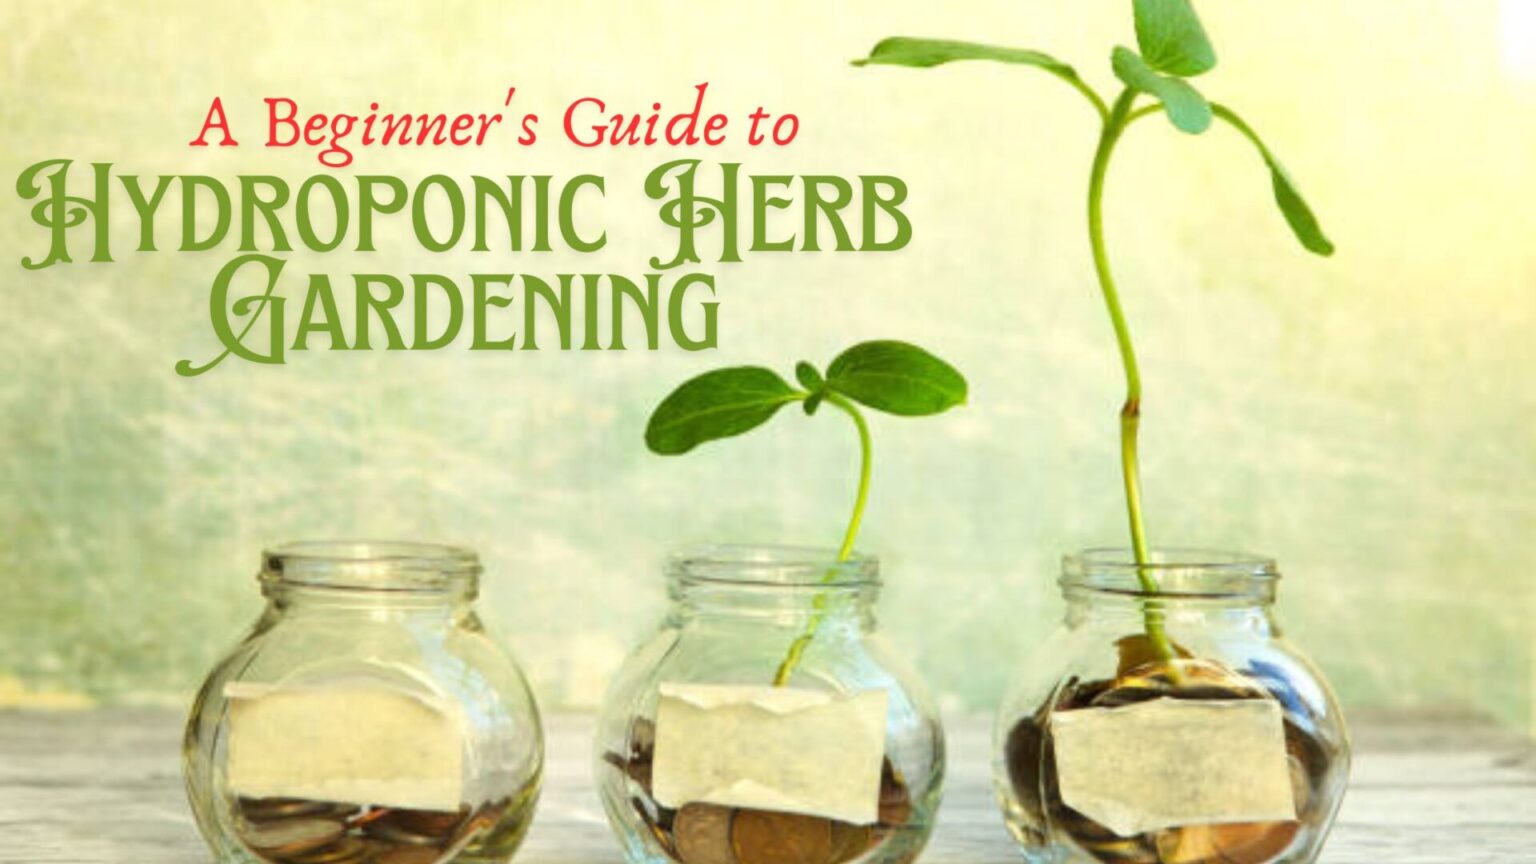 A Beginner's Guide to Hydroponic Herb Gardening